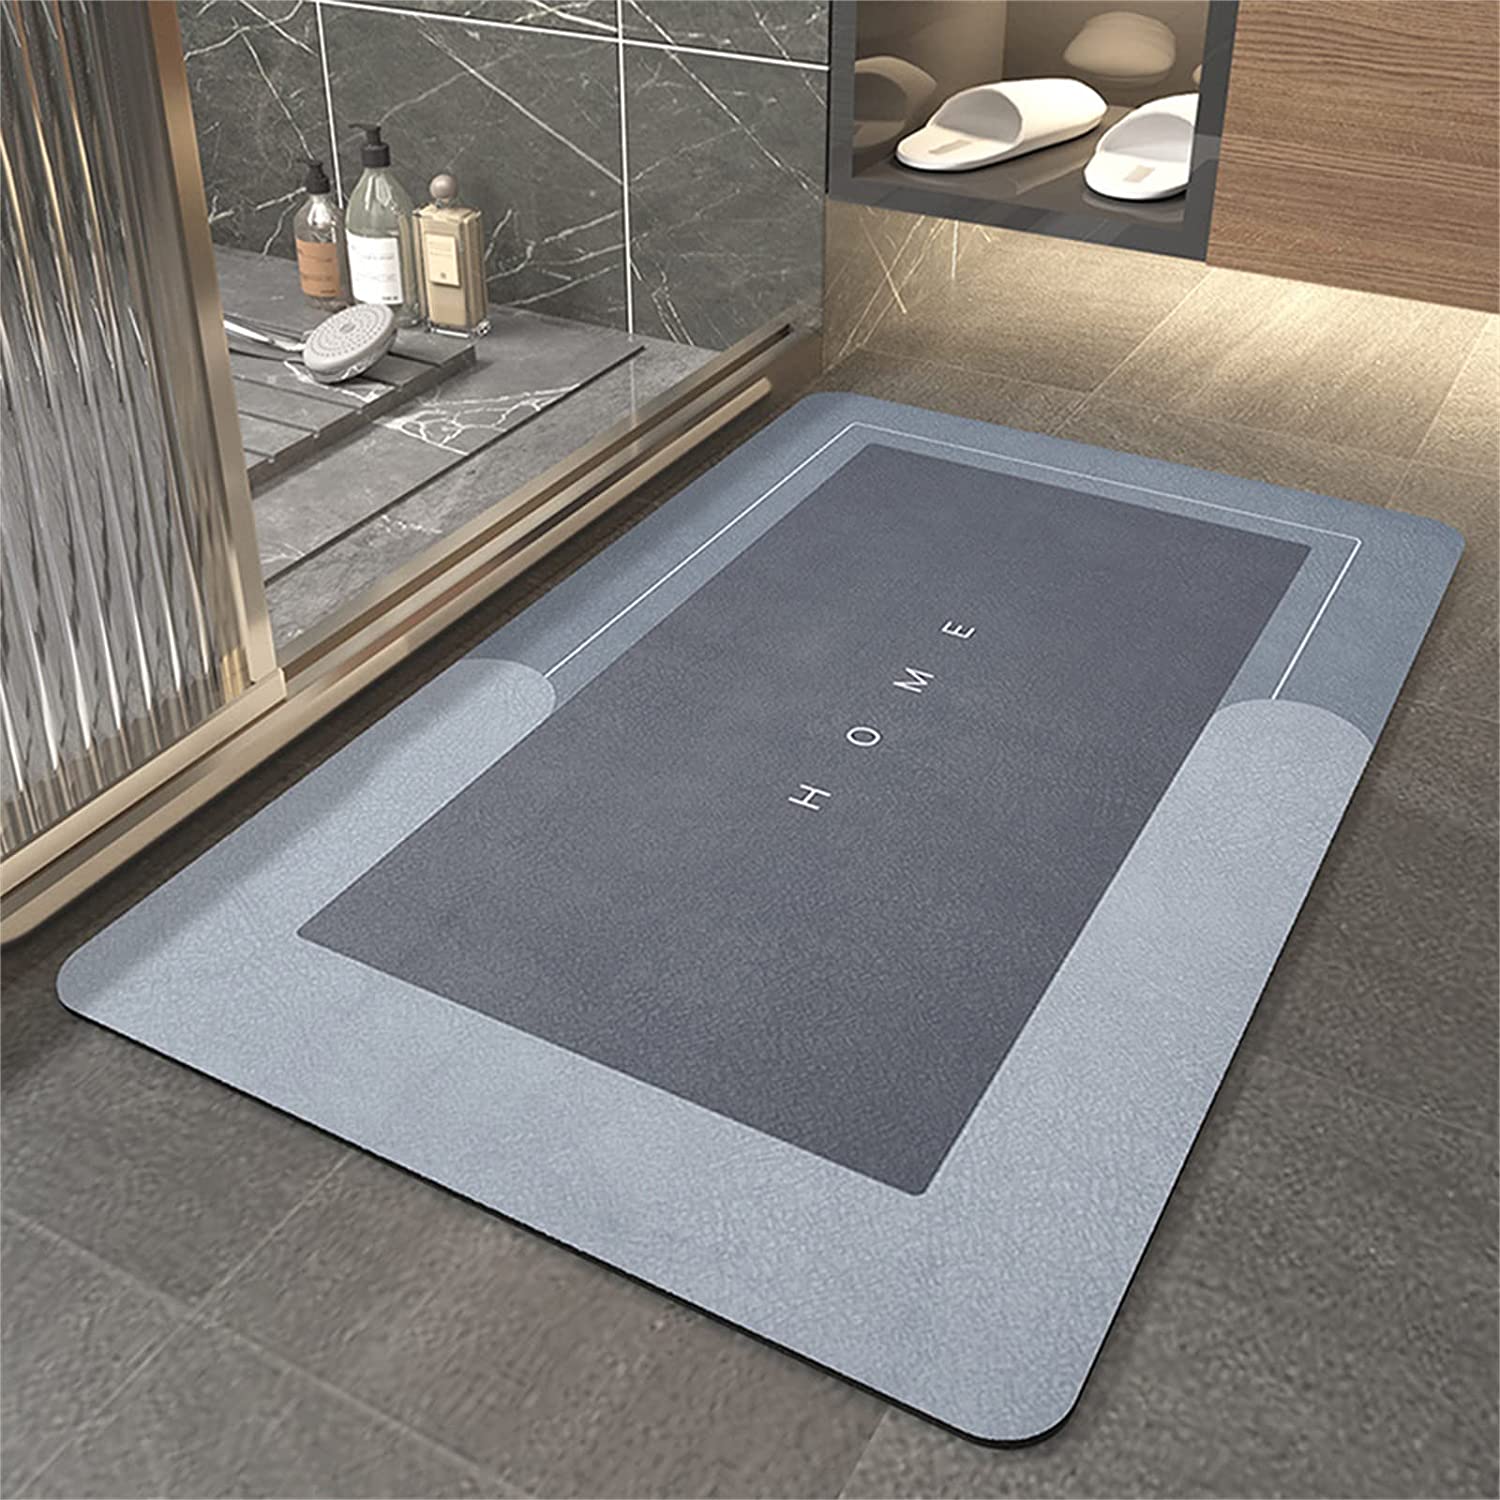 TOKLYUIE Super Absorbent Floor Mat, Quick-Drying Bathroom Mats, Absorbent  Bath Mats for Home, Rubber Non-Slip Bottoms, Easy to Clean, Simple Bathroom